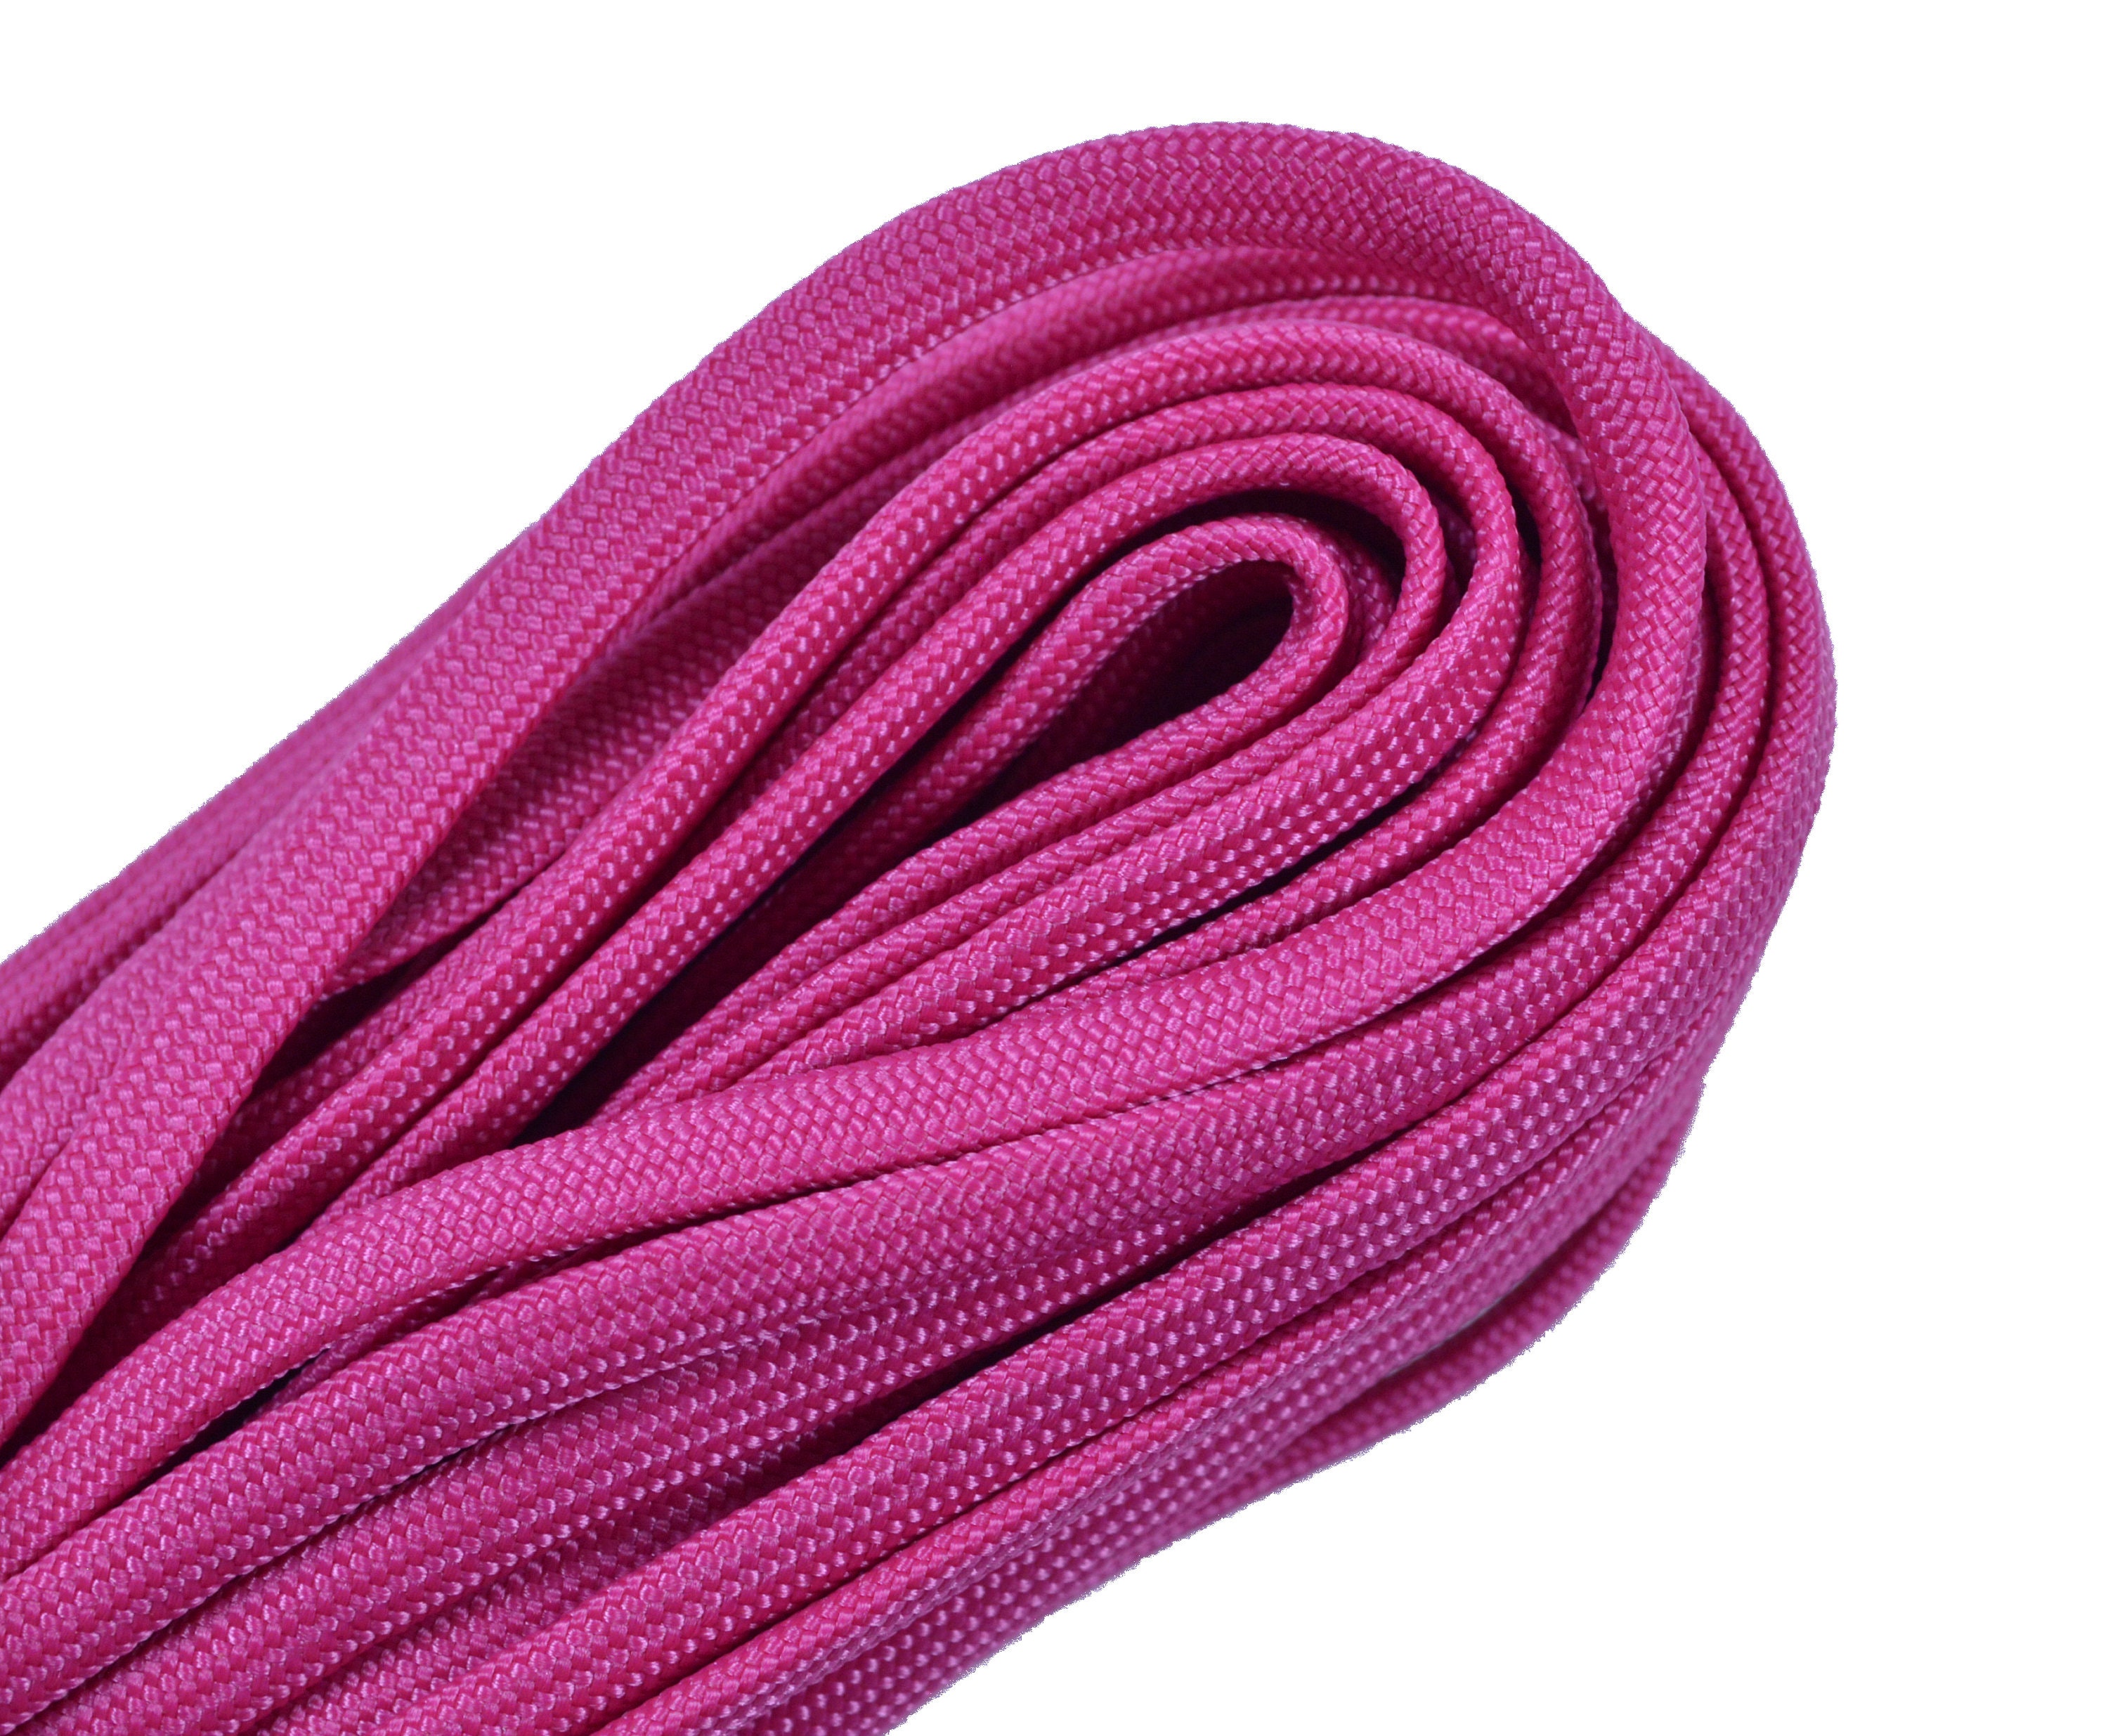 Neon Pink Micro Cord for Paracord - 1/16 inch (1.18mm) Accessory Rope - 1000 Foot Spool